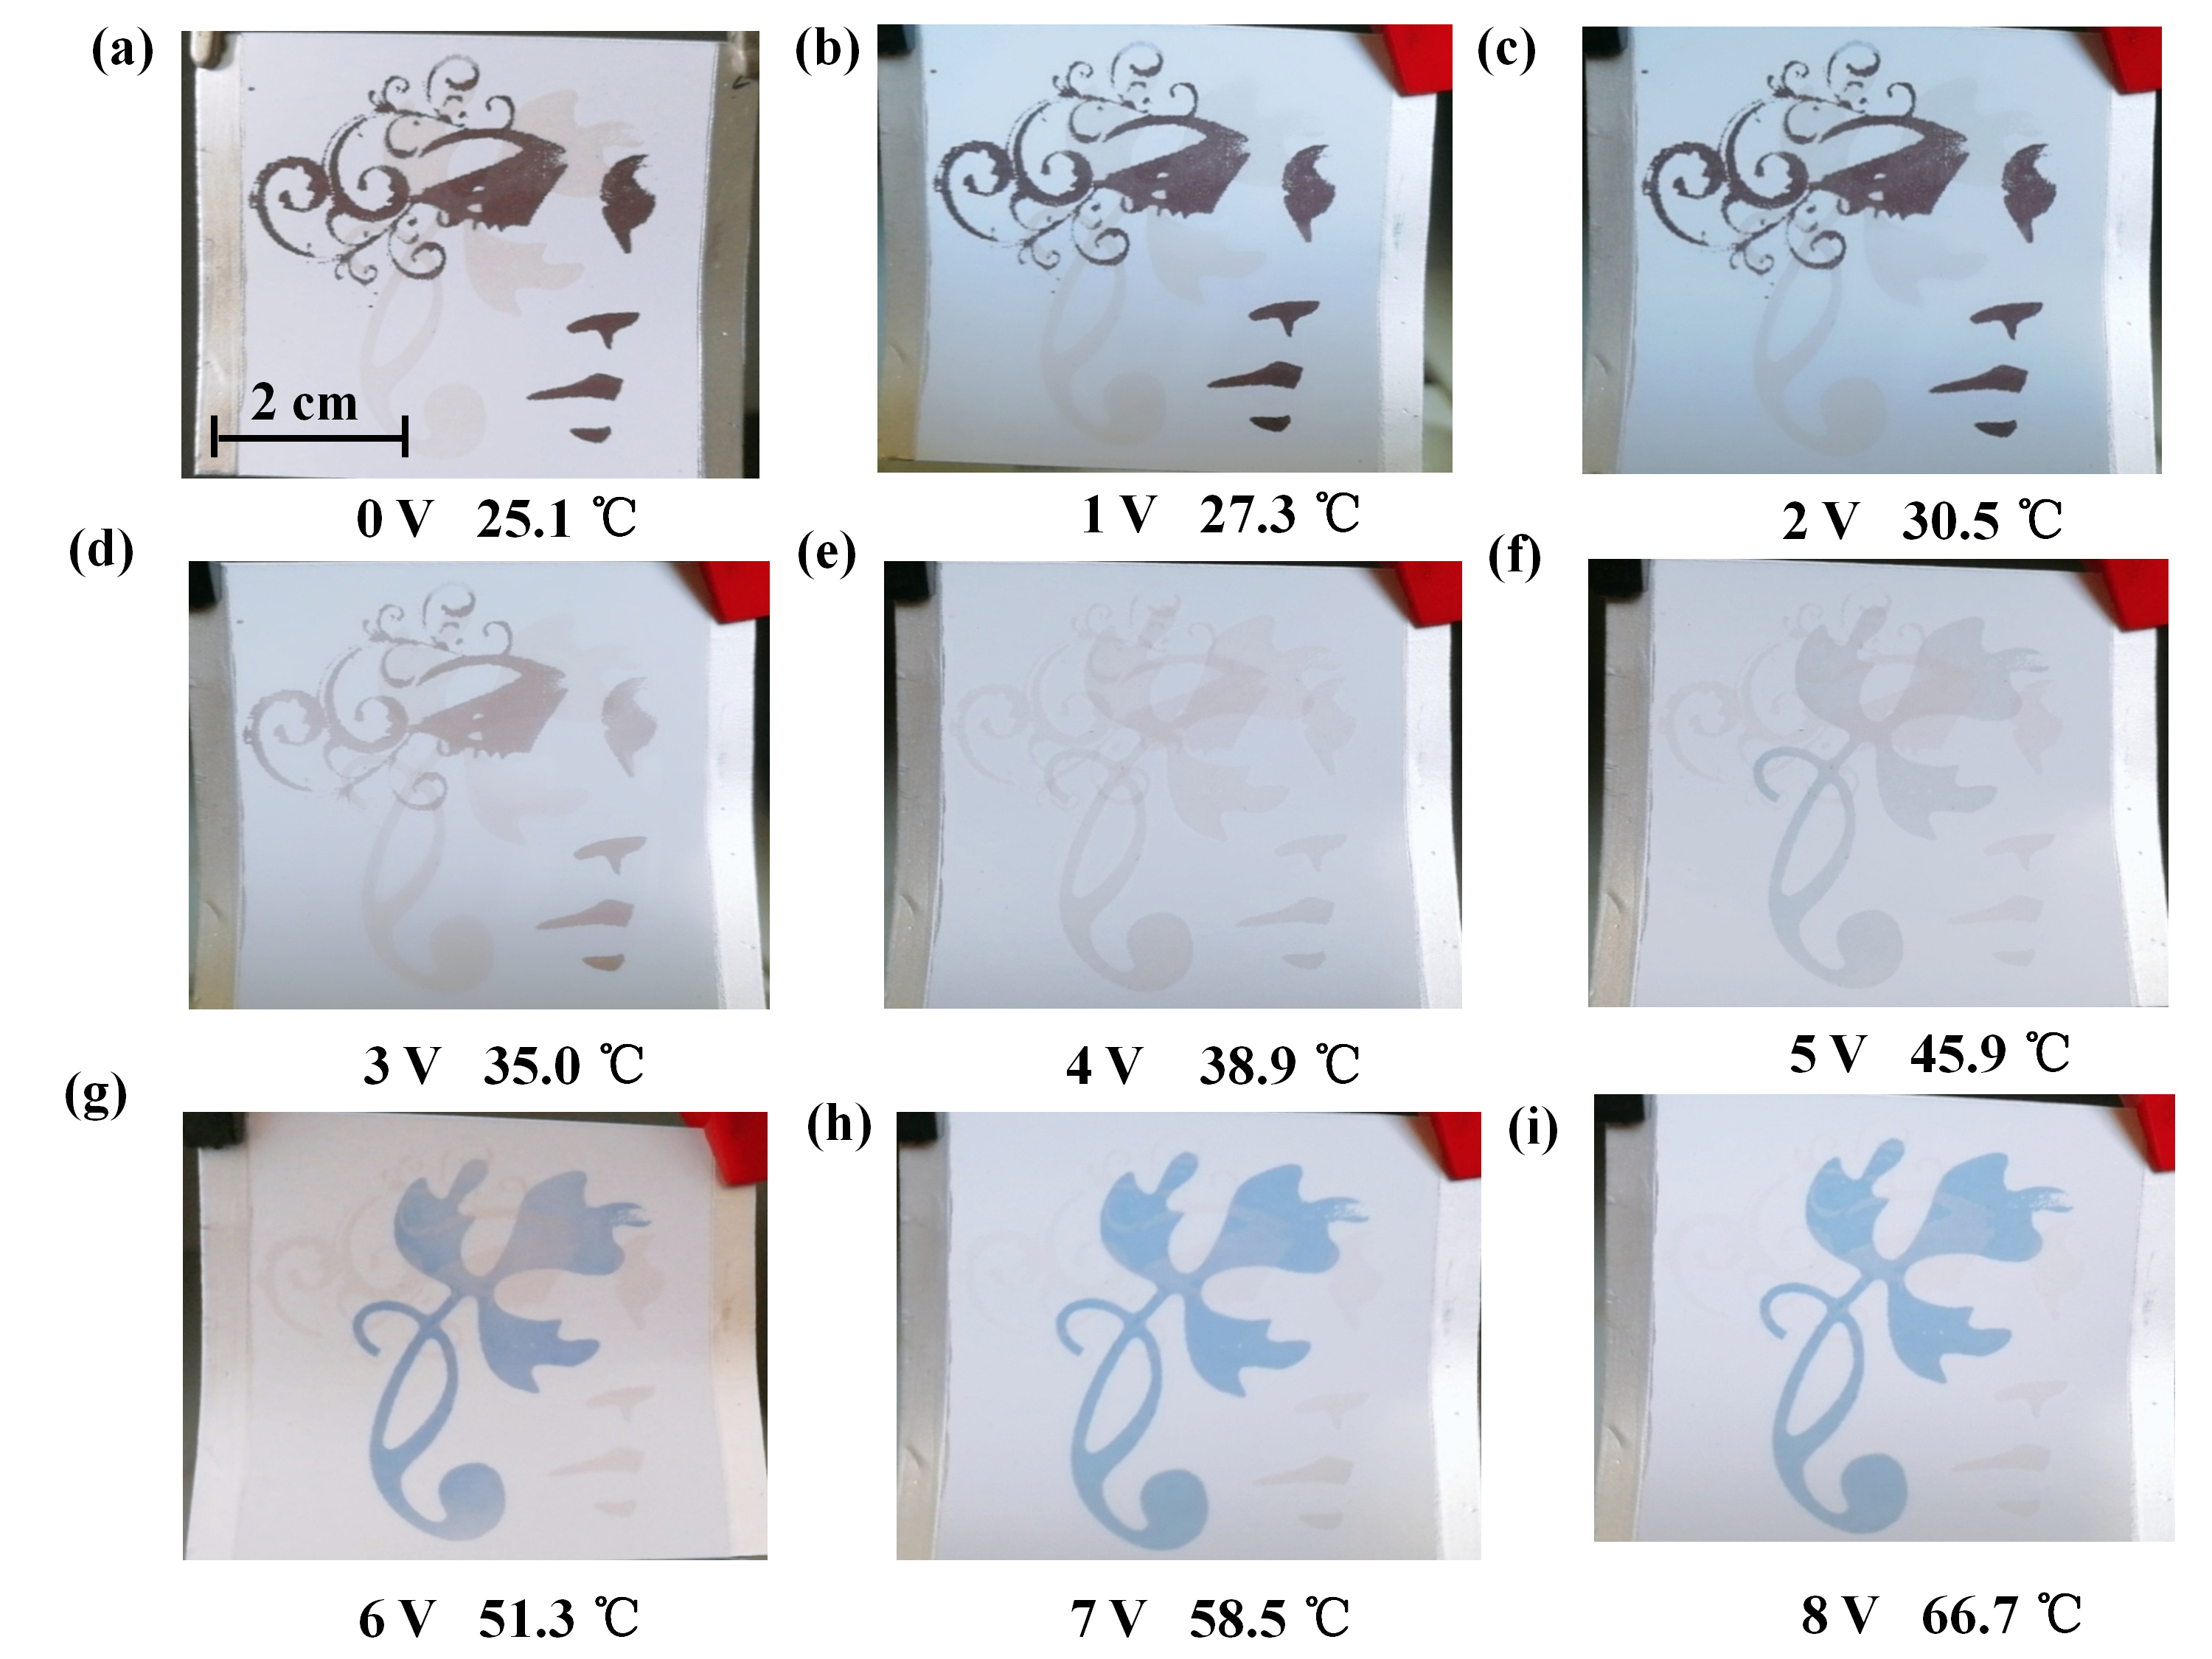 Vivid exhibition of high resolution pattern changes during multiple thermochromic processes